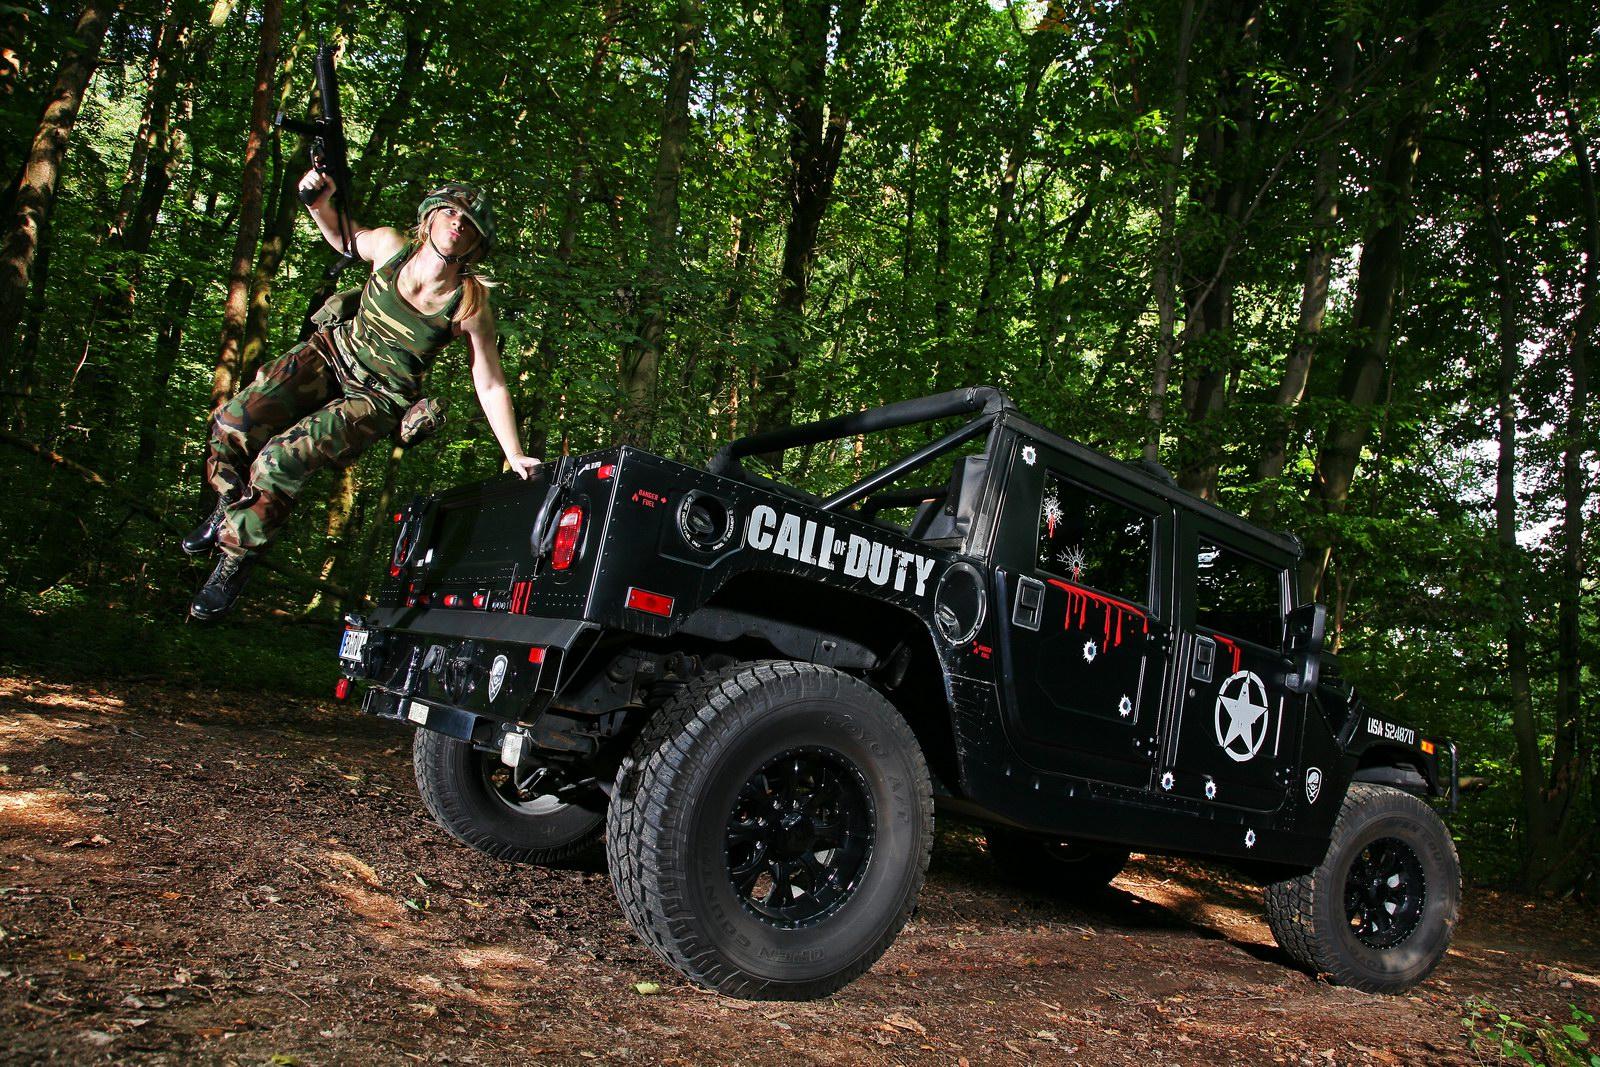 Wallpaper N Costumes: Call of Duty Inspires Hummer H1 Wrap